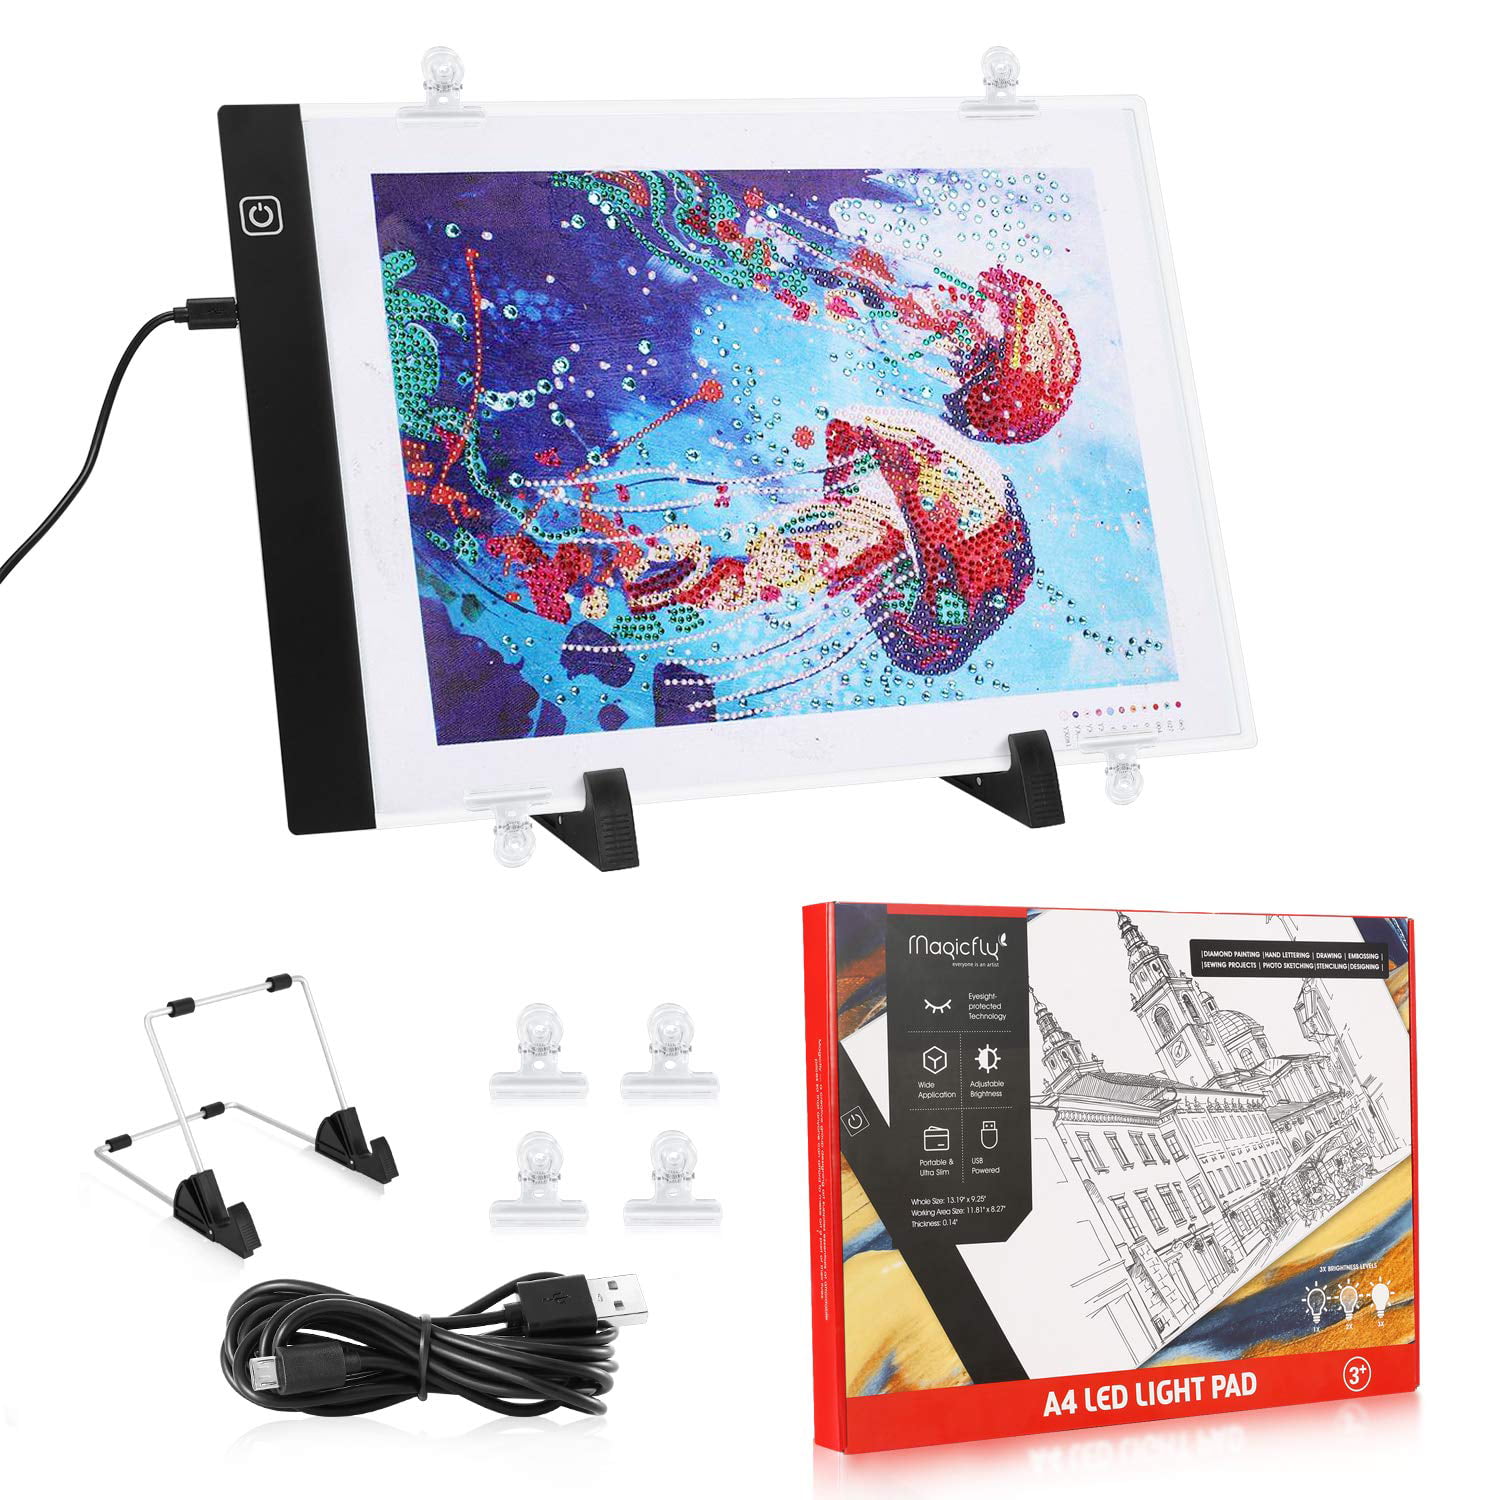 LAMPTOP Dimmable Light Box Diamond Painting Kit Including A4 LED Light Pad Board 30pcs Diamond Painting Tools and 28-Slot Box for Rhinestone Embroidery,Crystal Cross Stitch,Drawing,Sketching,Tracing